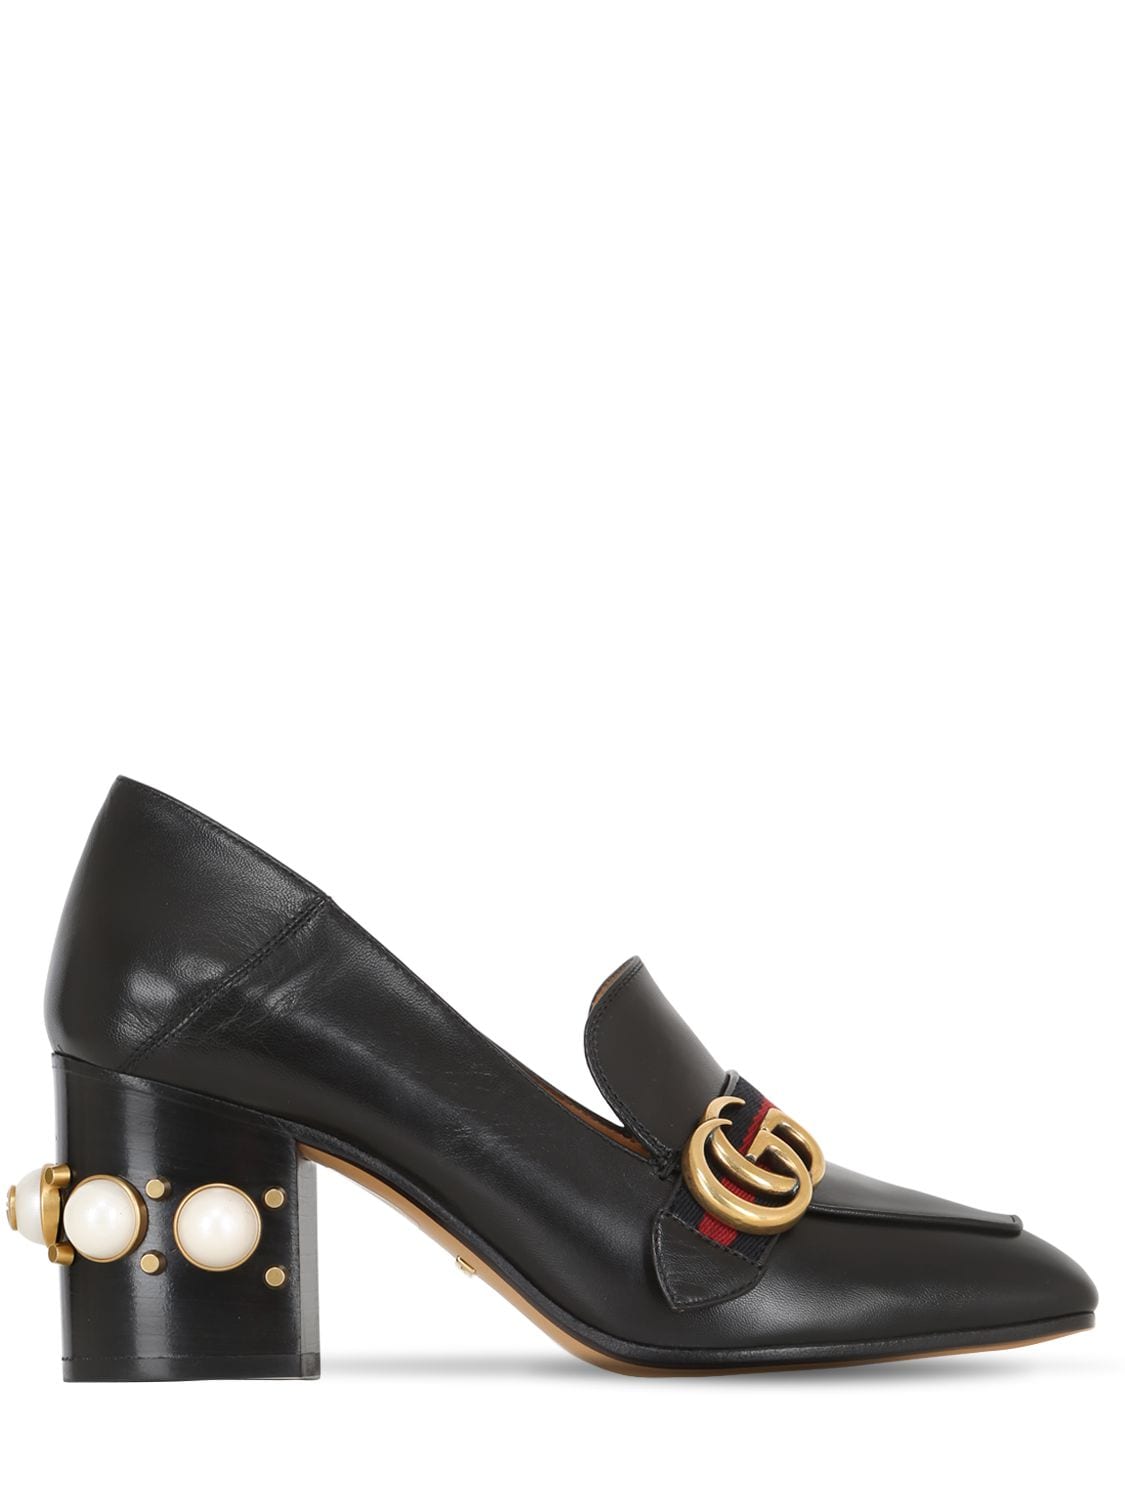 GUCCI 75Mm Peyton Embellished Leather Pumps in Black | ModeSens